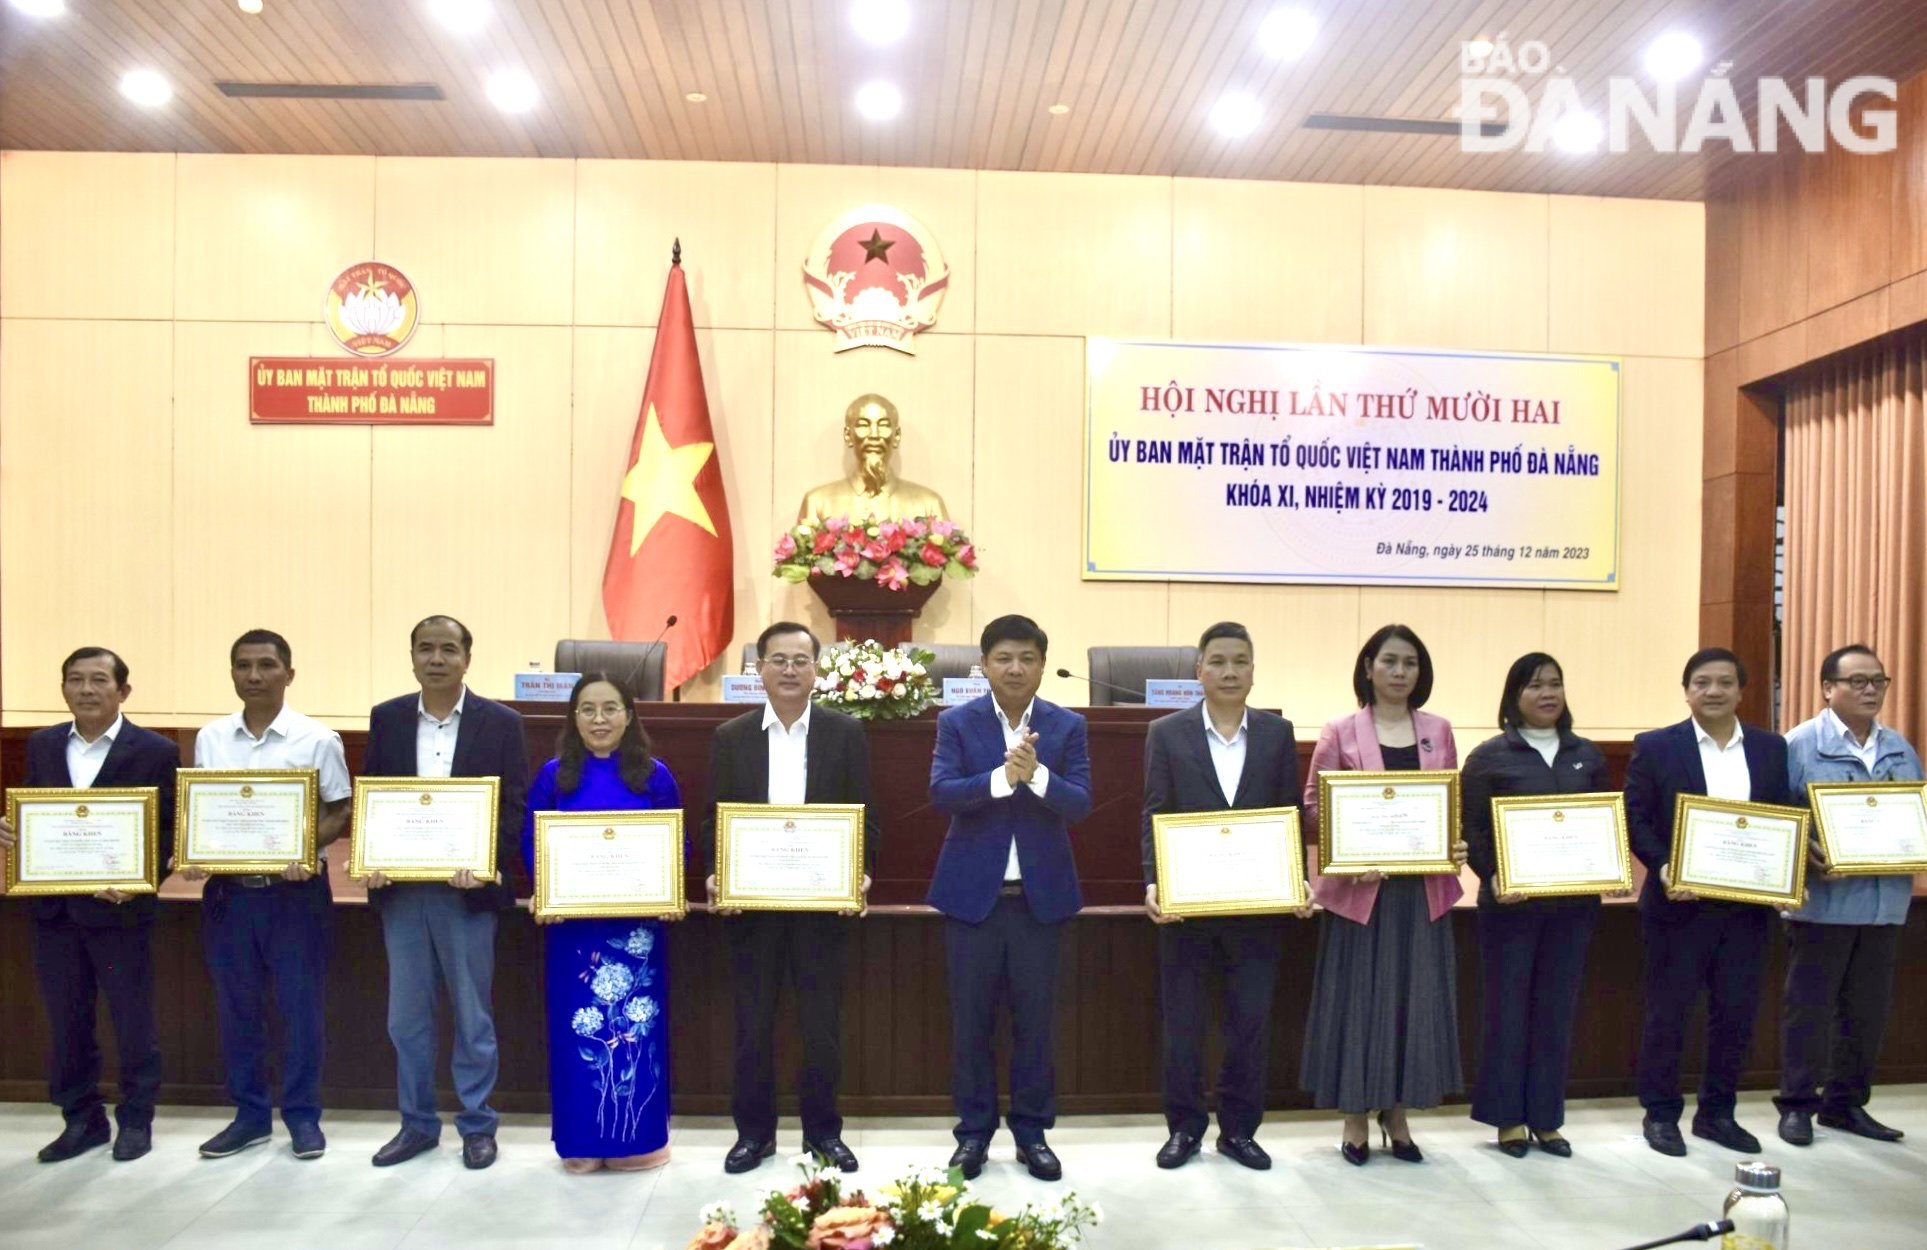 Deputy Secretary of the municipal Party Committee Luong Nguyen Minh Triet (6th, left) presenting Certificates of Merit from the Chairman of the People's Committee for collectives and individuals with outstanding achievements in the mobilisation and management of the 